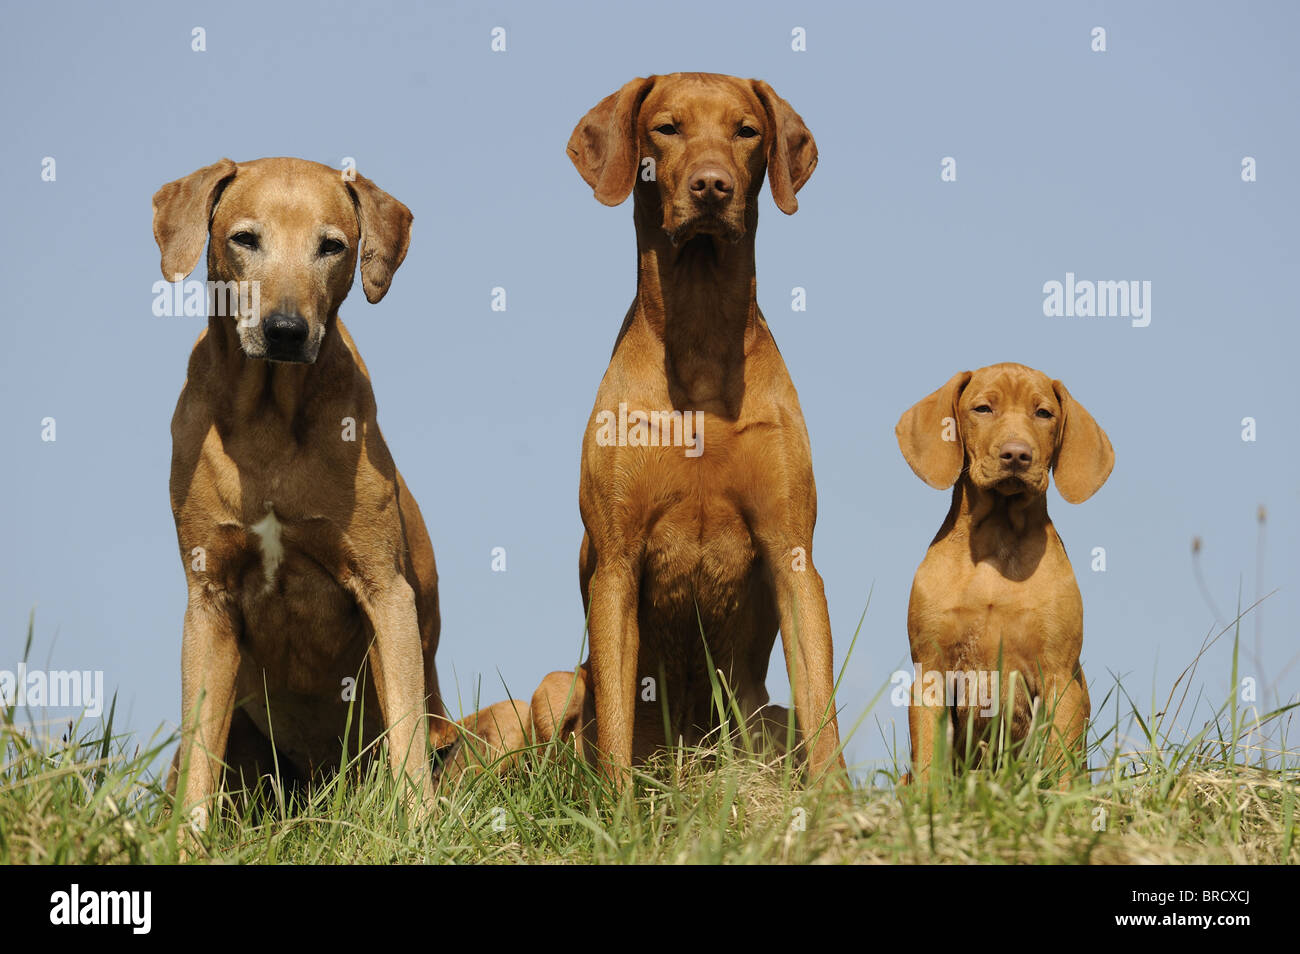 Rhodesian Ridgeback (Canis lupus familiaris). Three dogs of different ages sitting next to each other in grass. Stock Photo